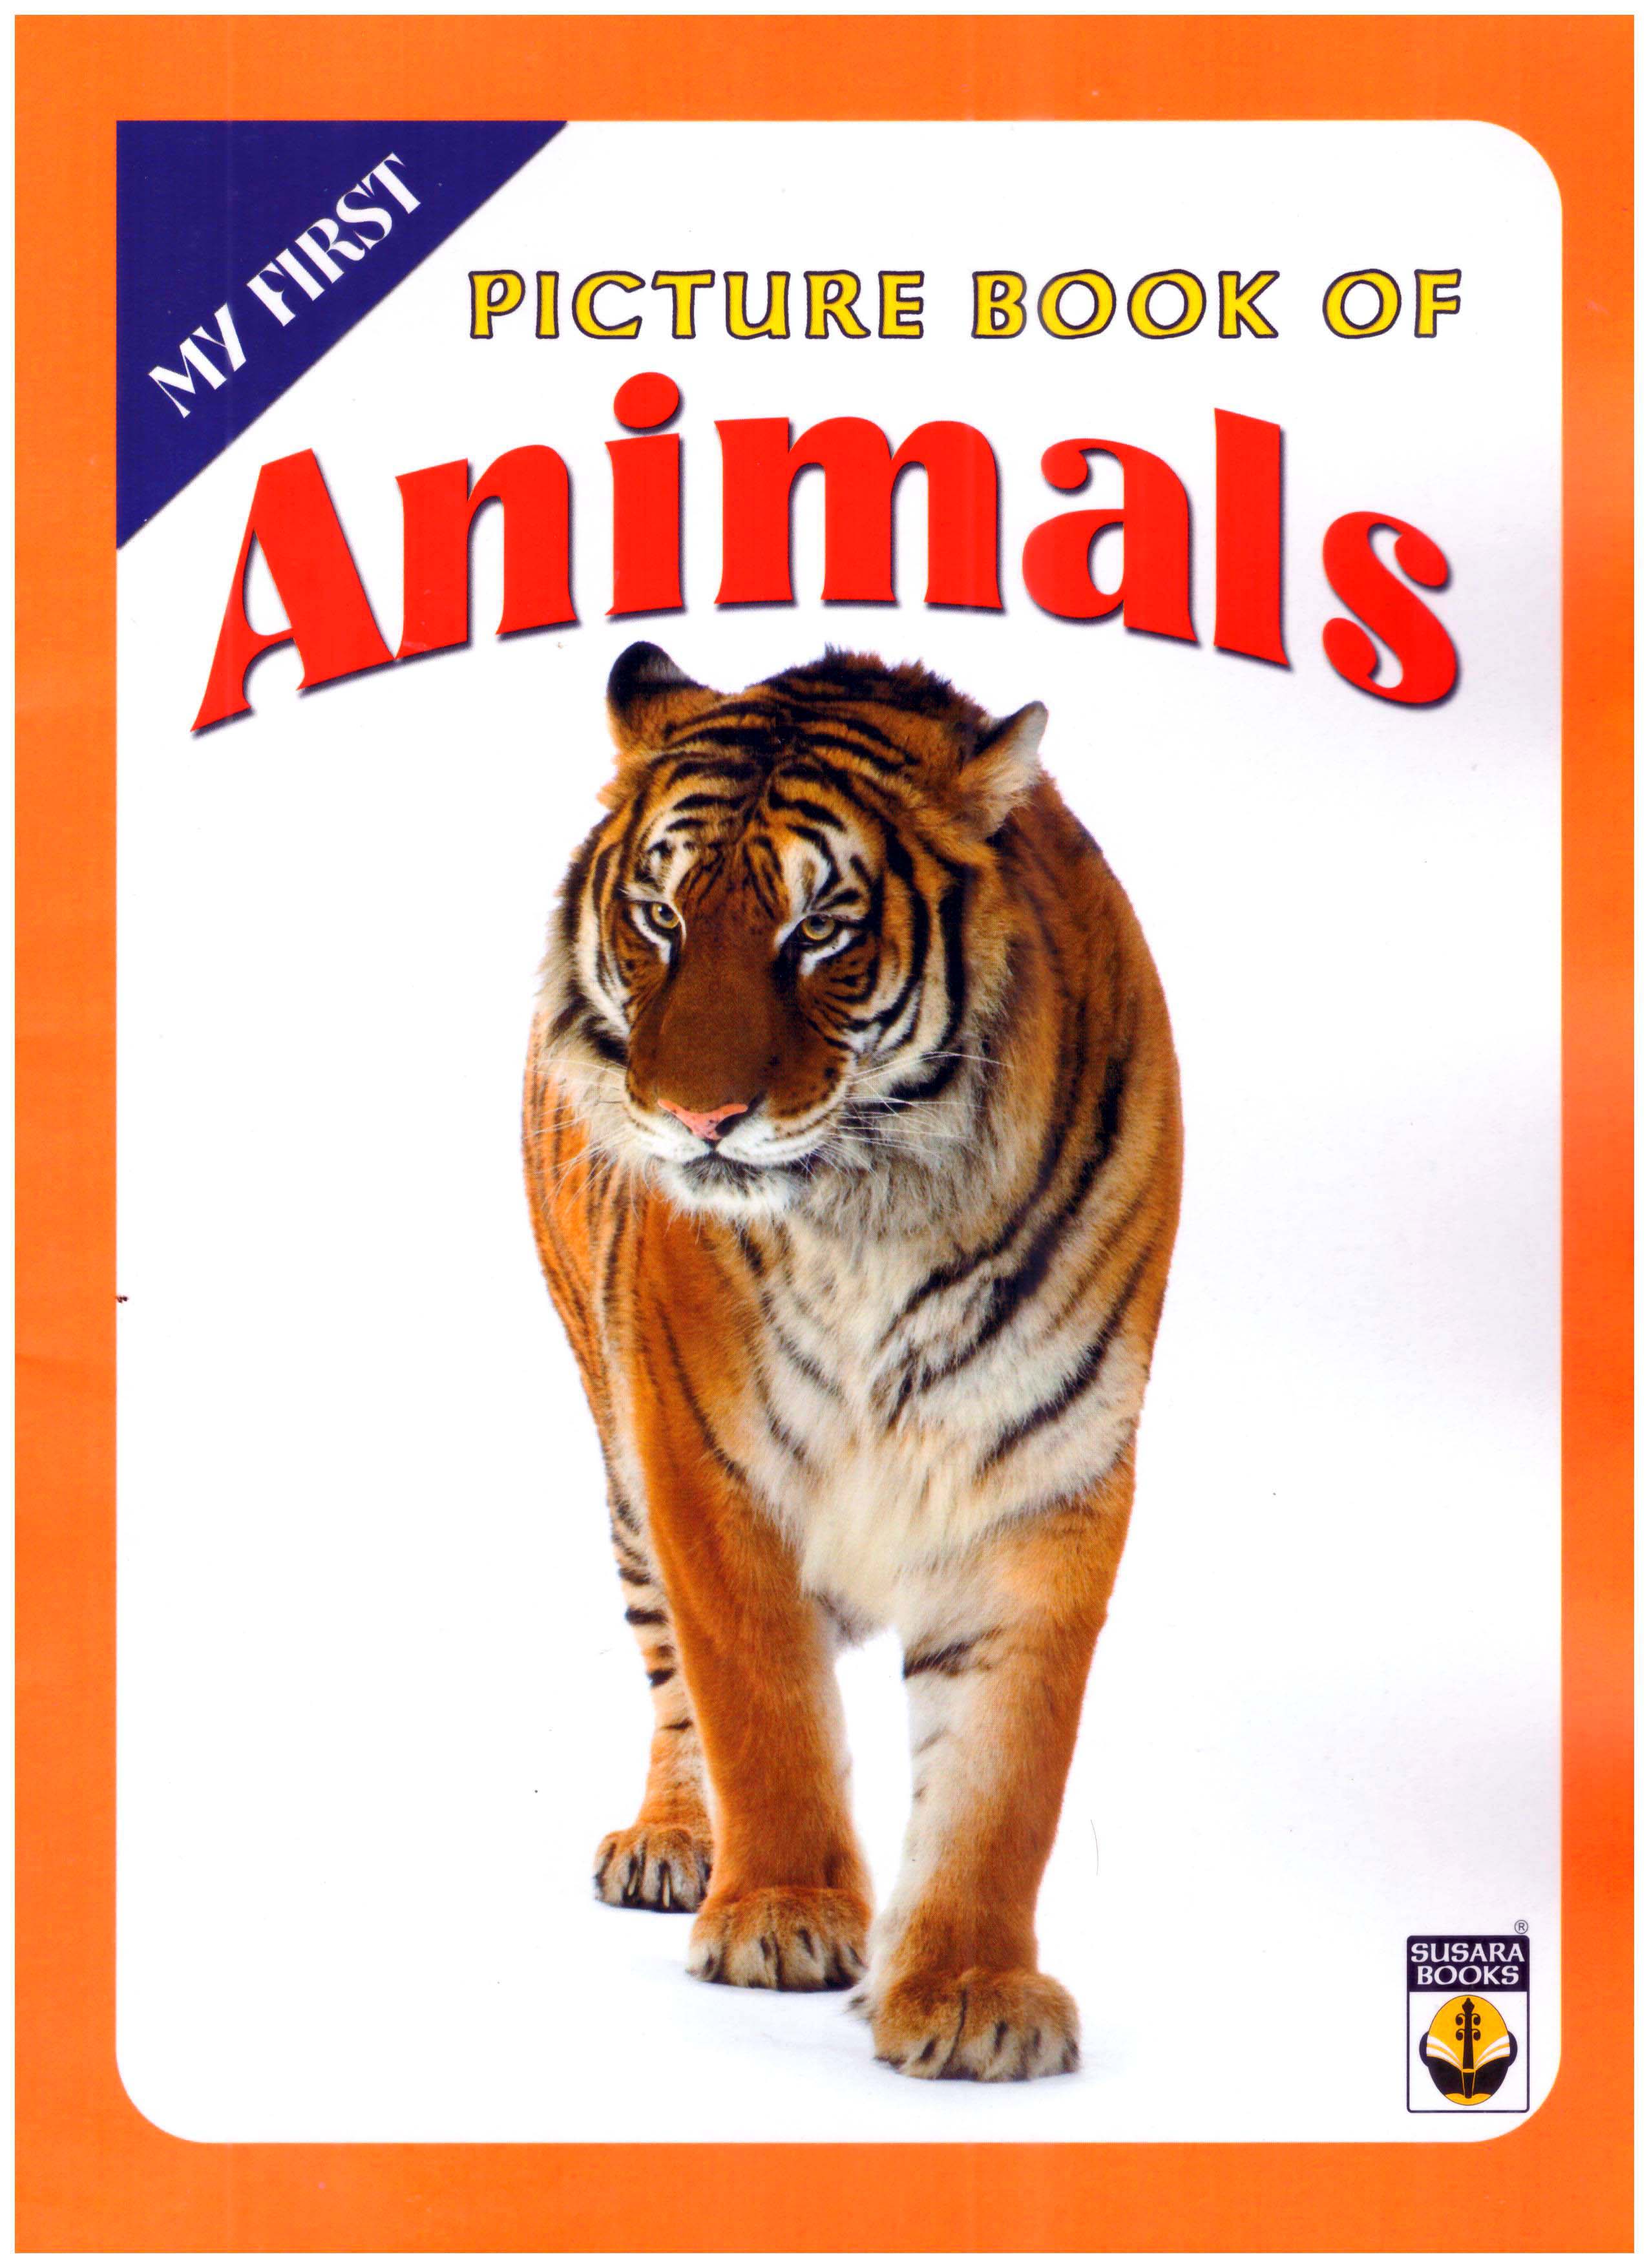 My First Picture Book of Animals